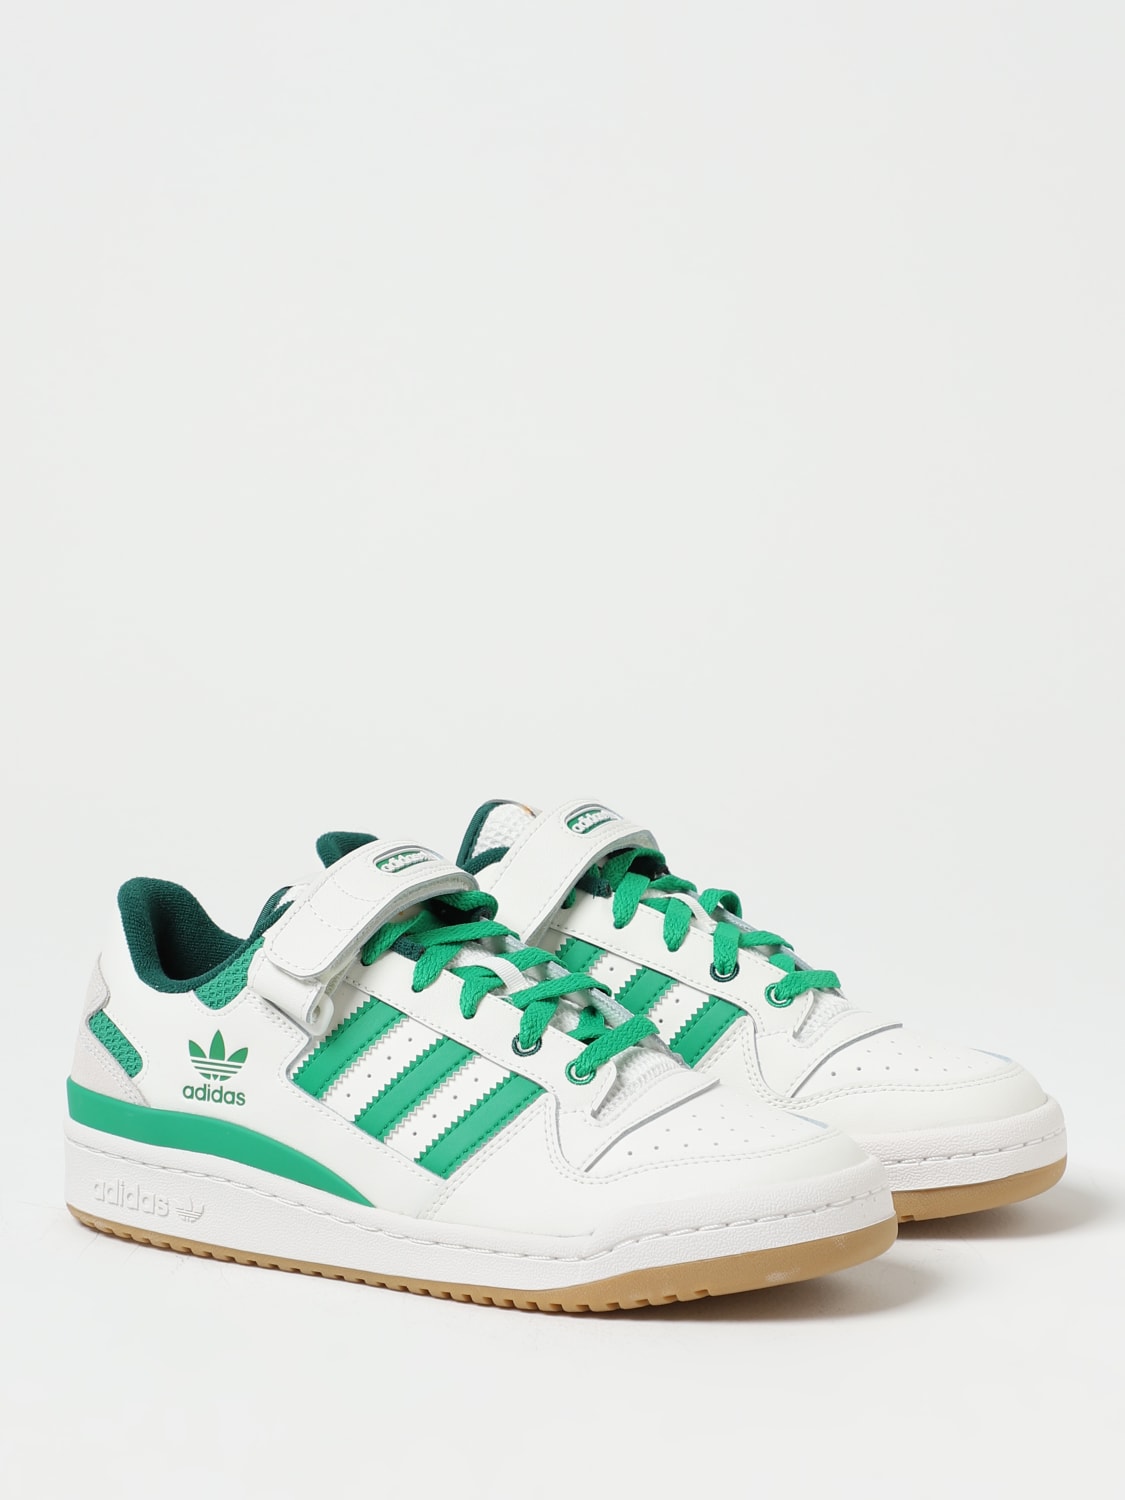 ADIDAS ORIGINALS: Forum - Low online Adidas White | at sneakers Originals sneakers recycled IE7175 fabrics in